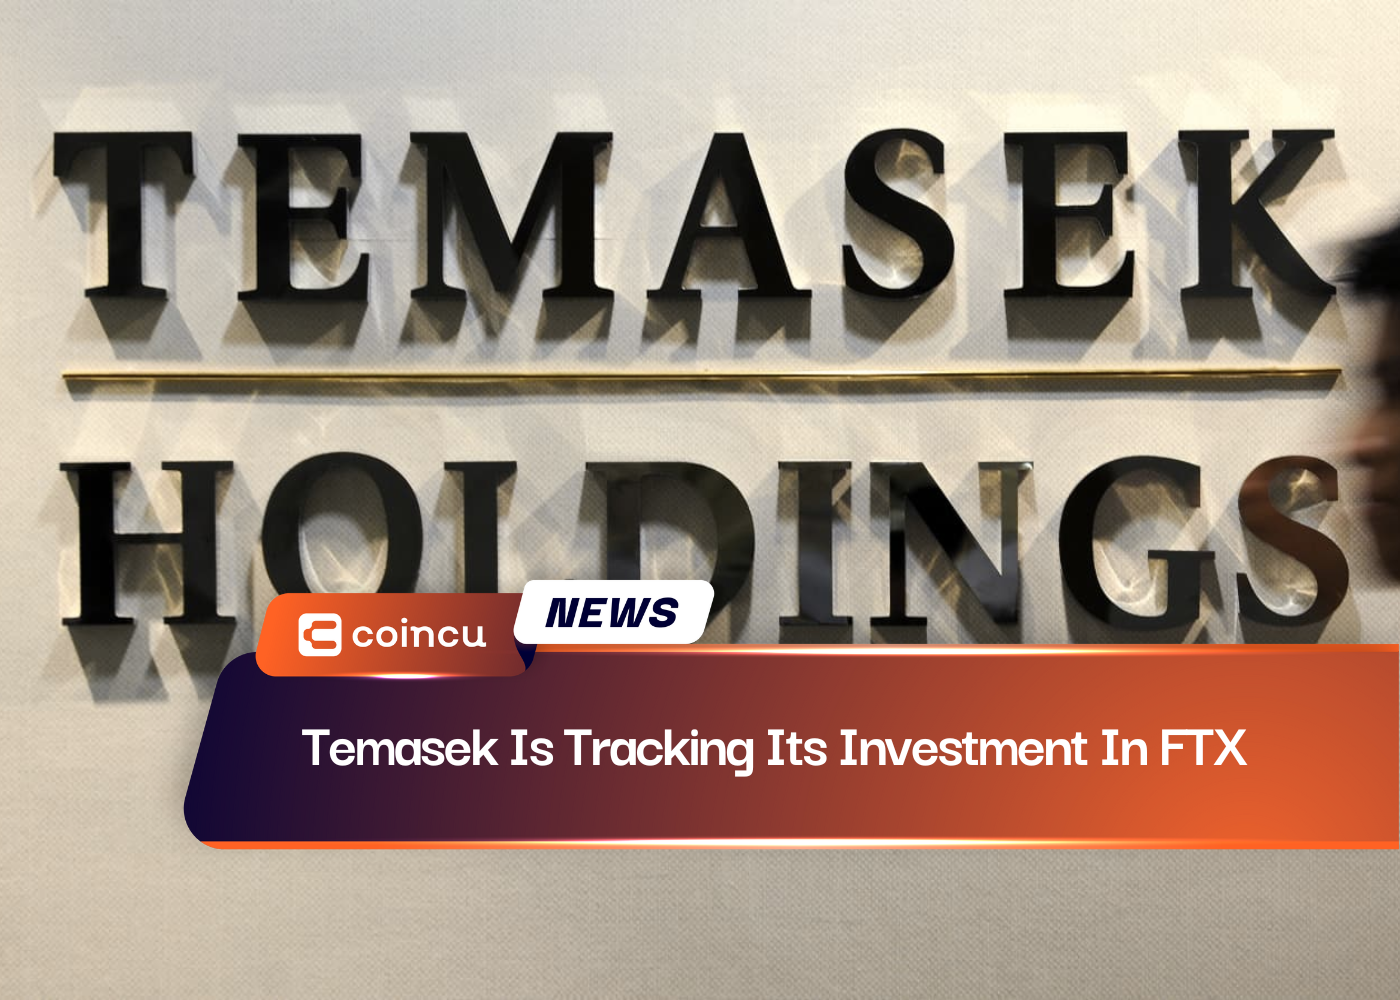 Temasek Is Tracking Its Investment In FTX